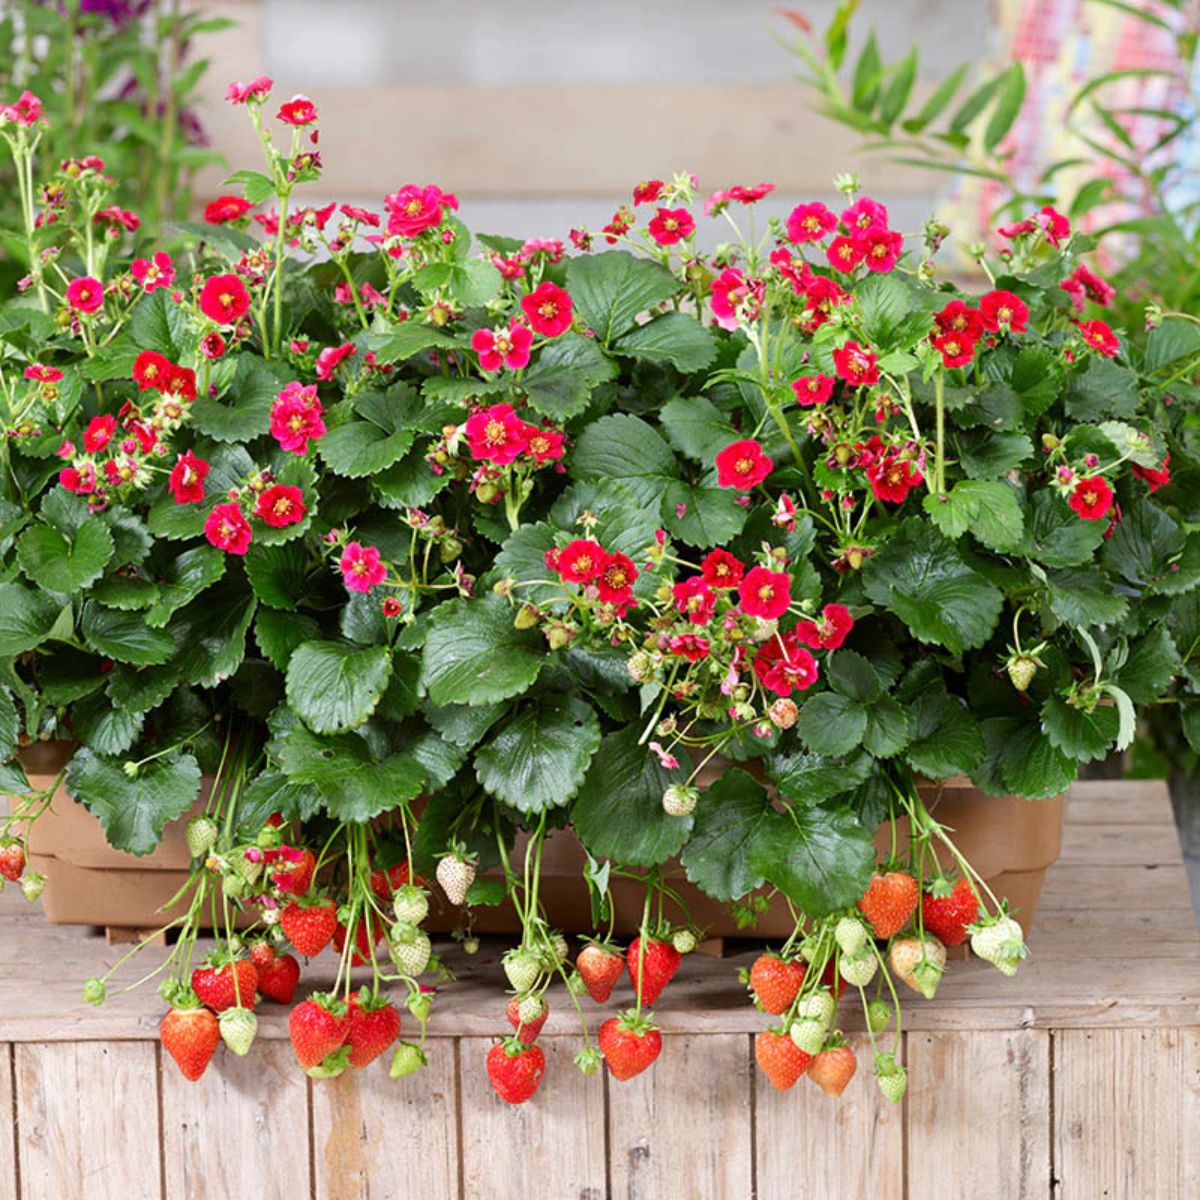 Summer breeze strawberry plant with red flowers, ripe and unripe fruits growing in a pot.